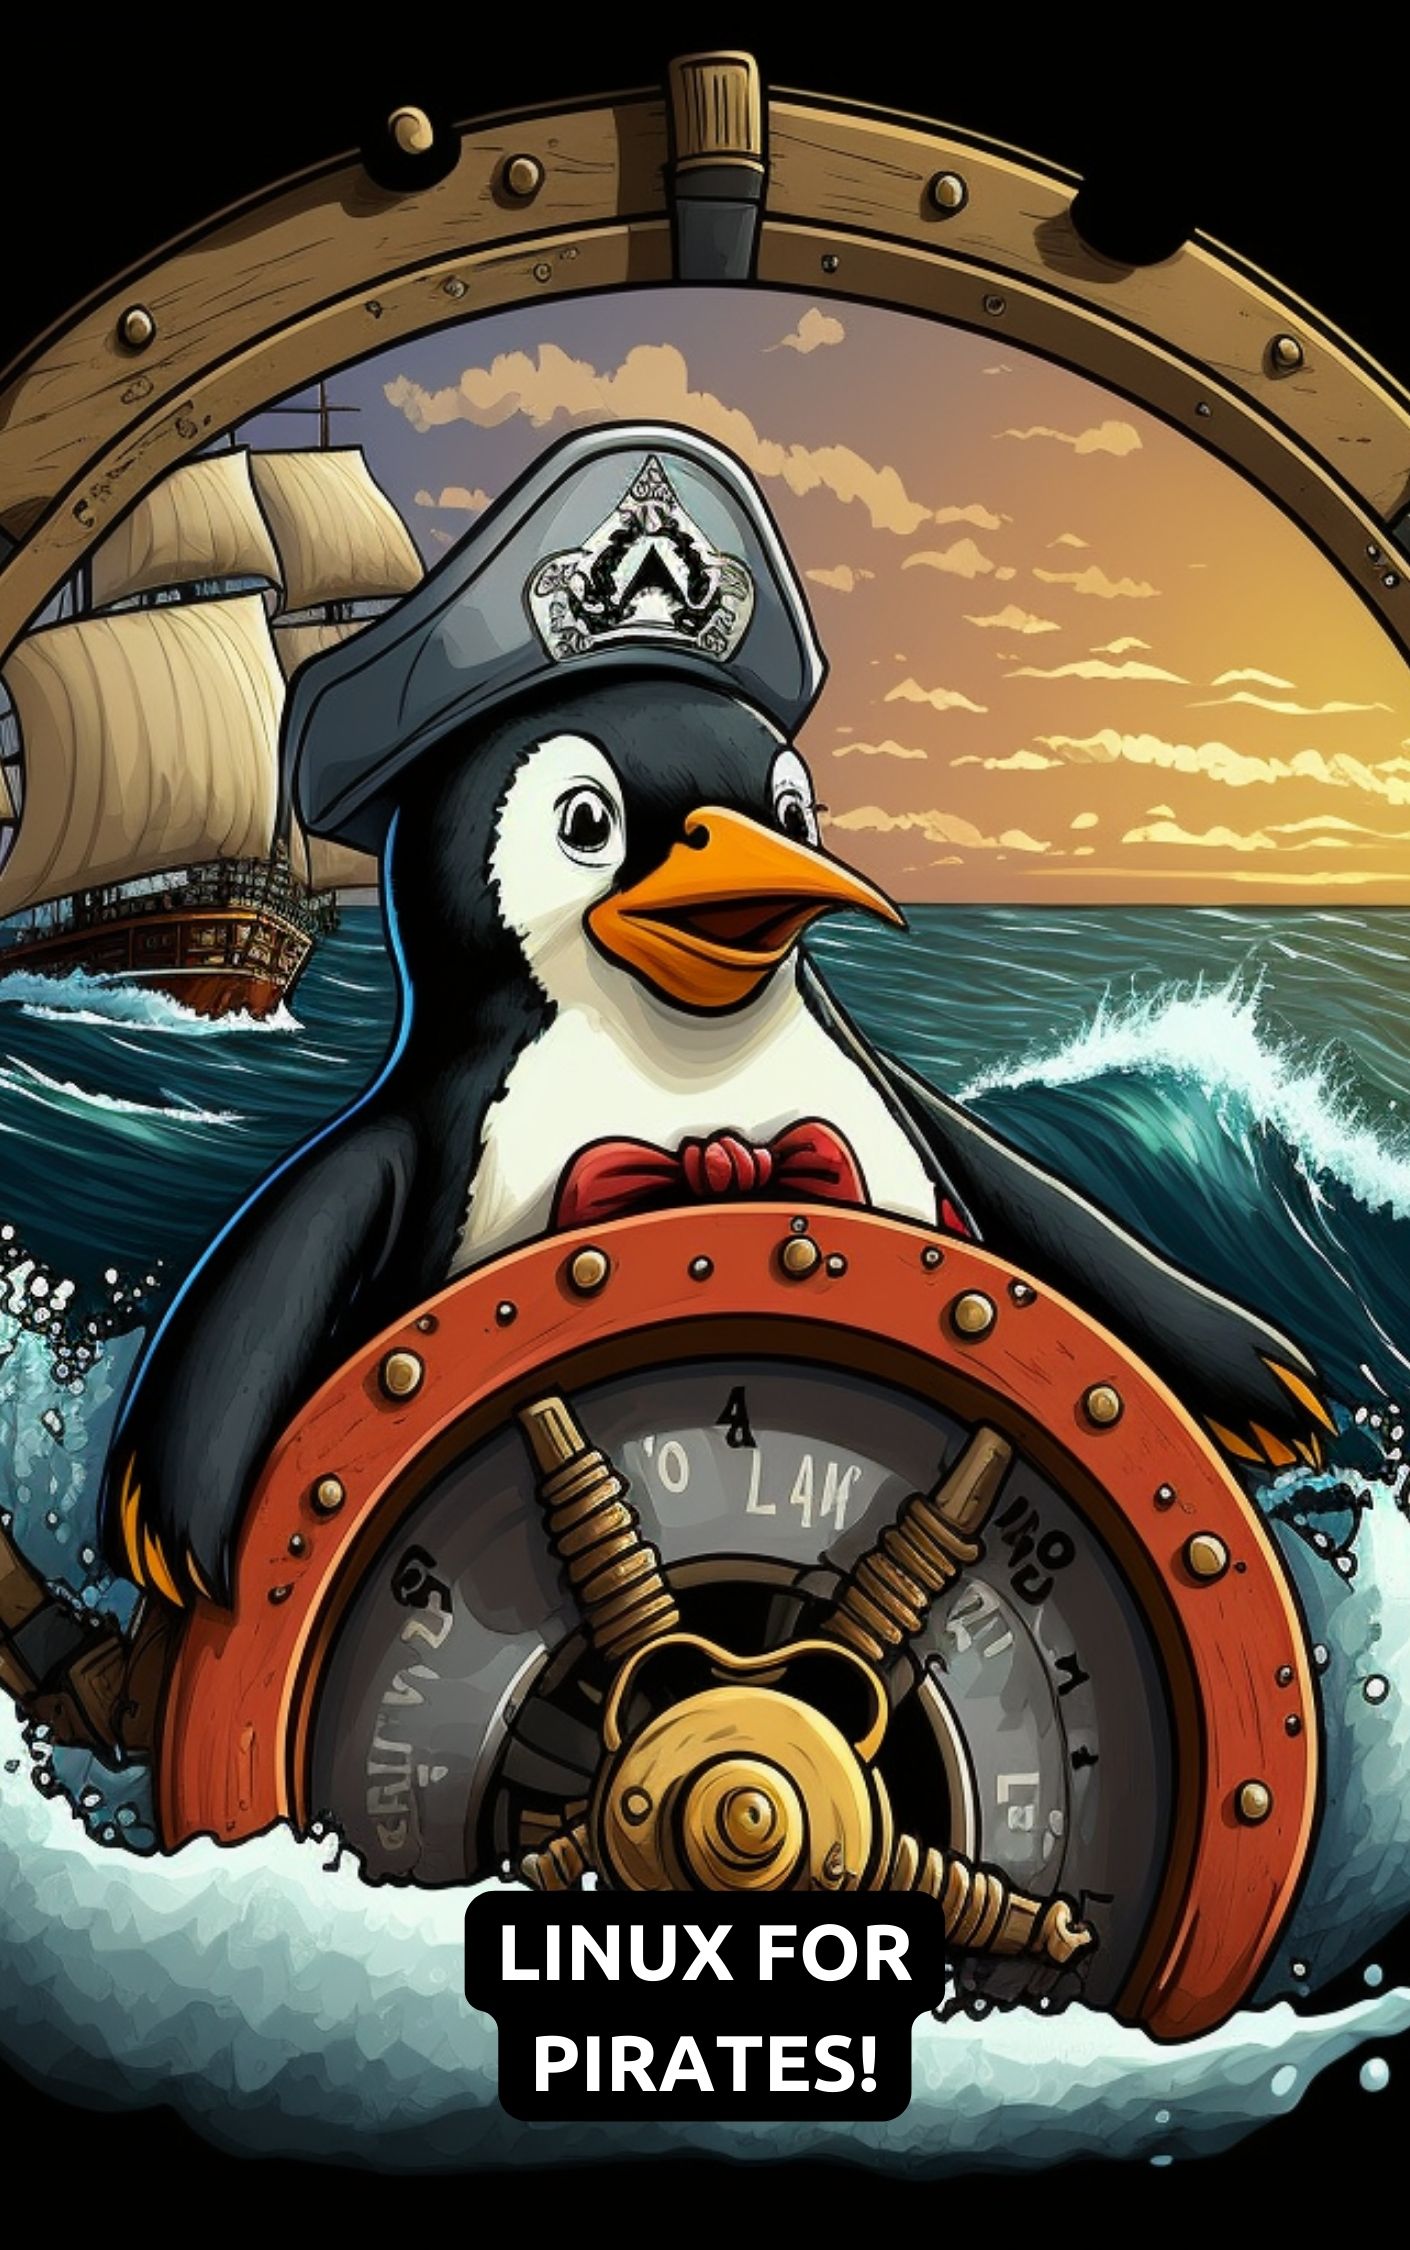 Linux for Pirates!